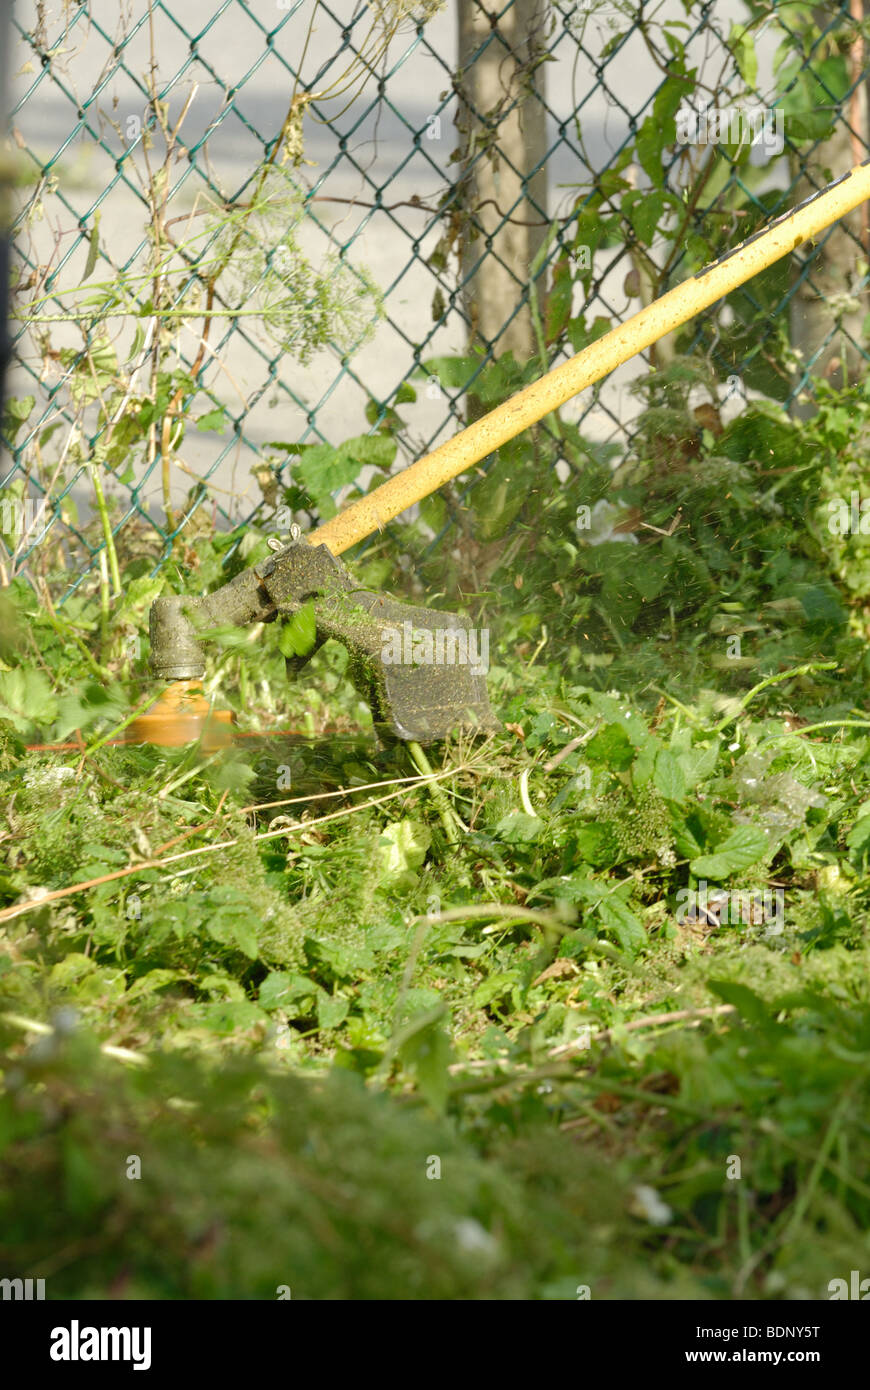 Close-up of a gas powered trimmer at work cutting through weeds. Stock Photo